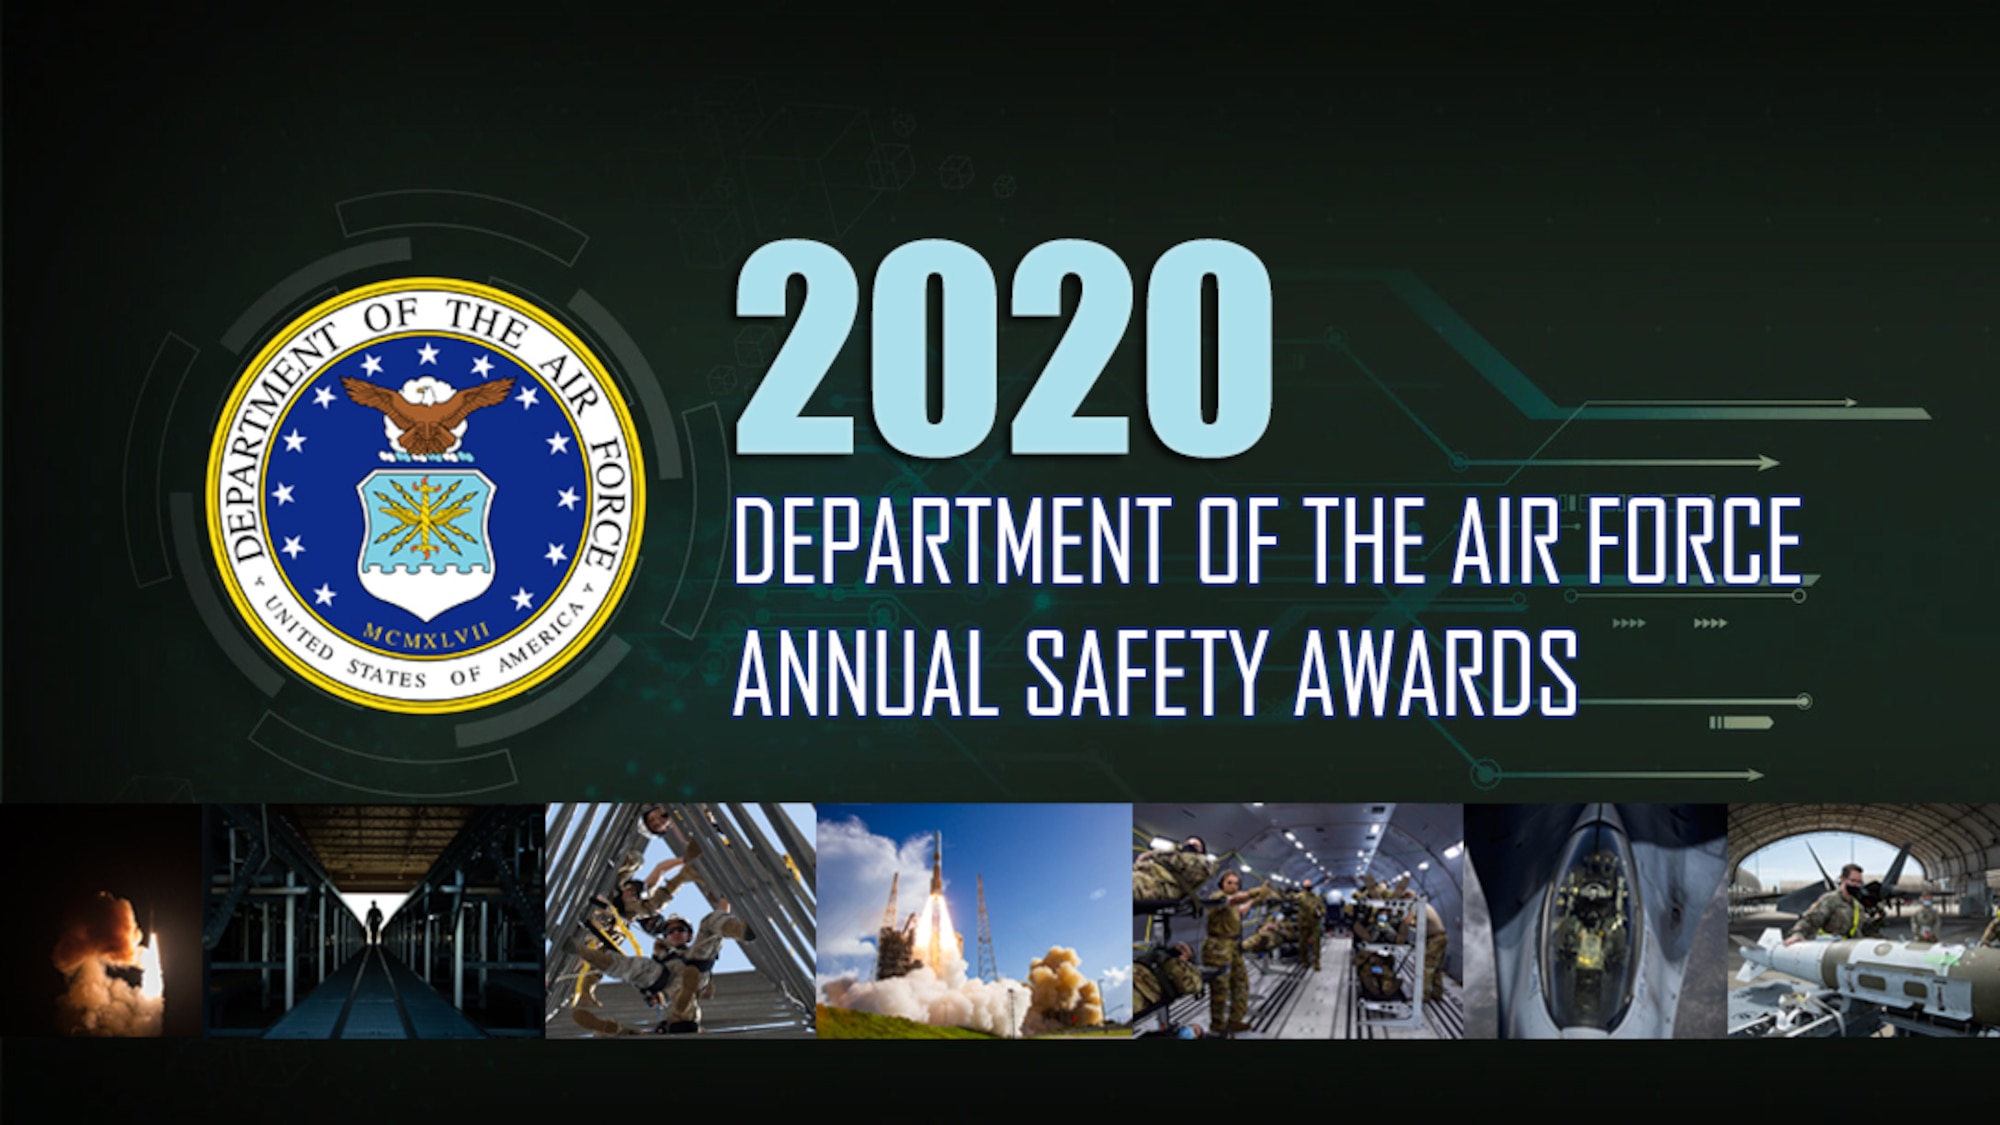 2020 Department of the Air Force Annual Safety Awards graphic